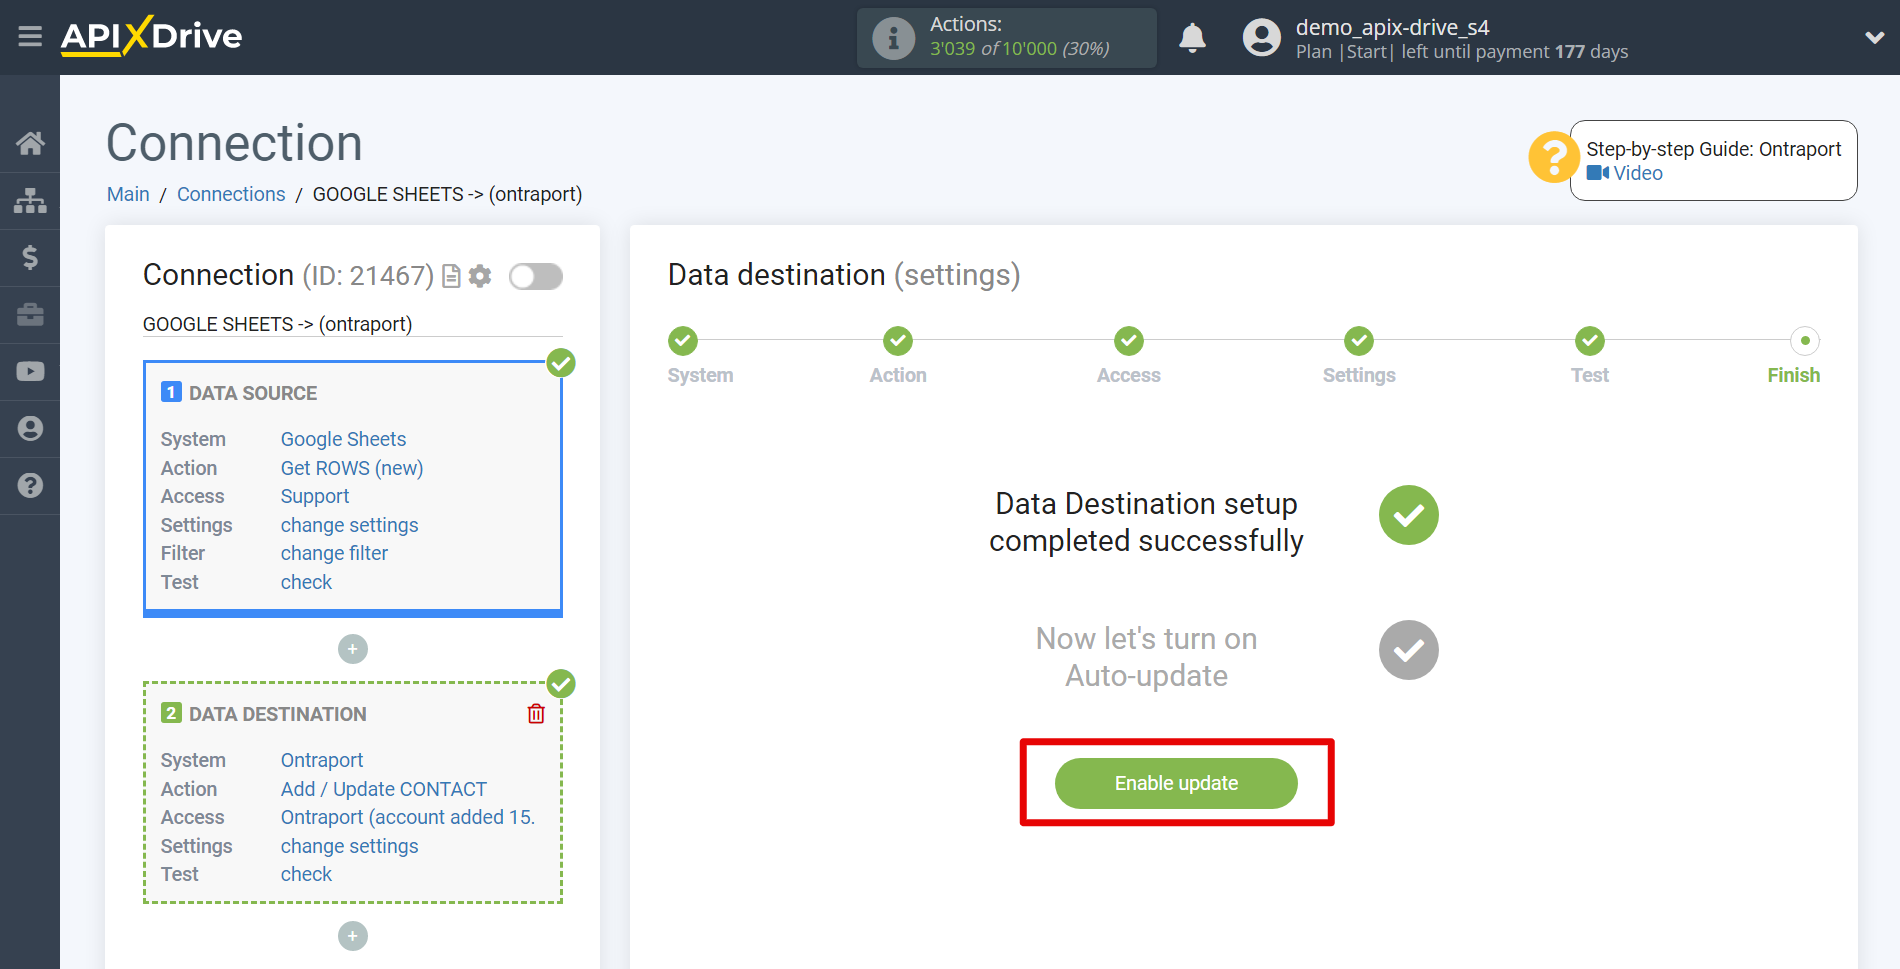 How to Connect Ontraport as Data Destination | Enable auto-update